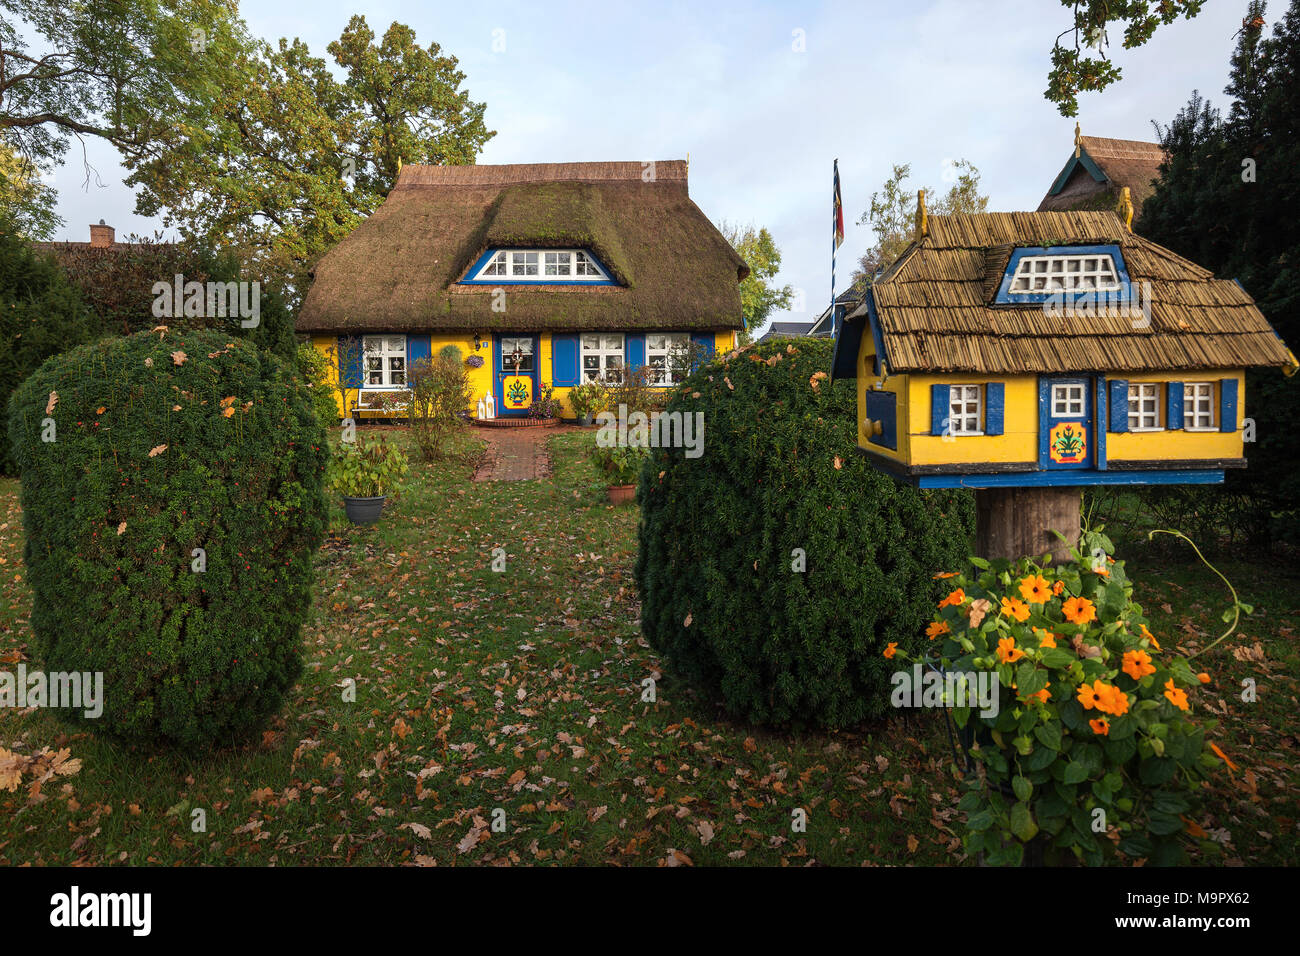 Typical yellow thatched-roof house with bird house, Born am Darß, Fischland-Darß-Zingst, Mecklenburg-Western Pomerania Stock Photo